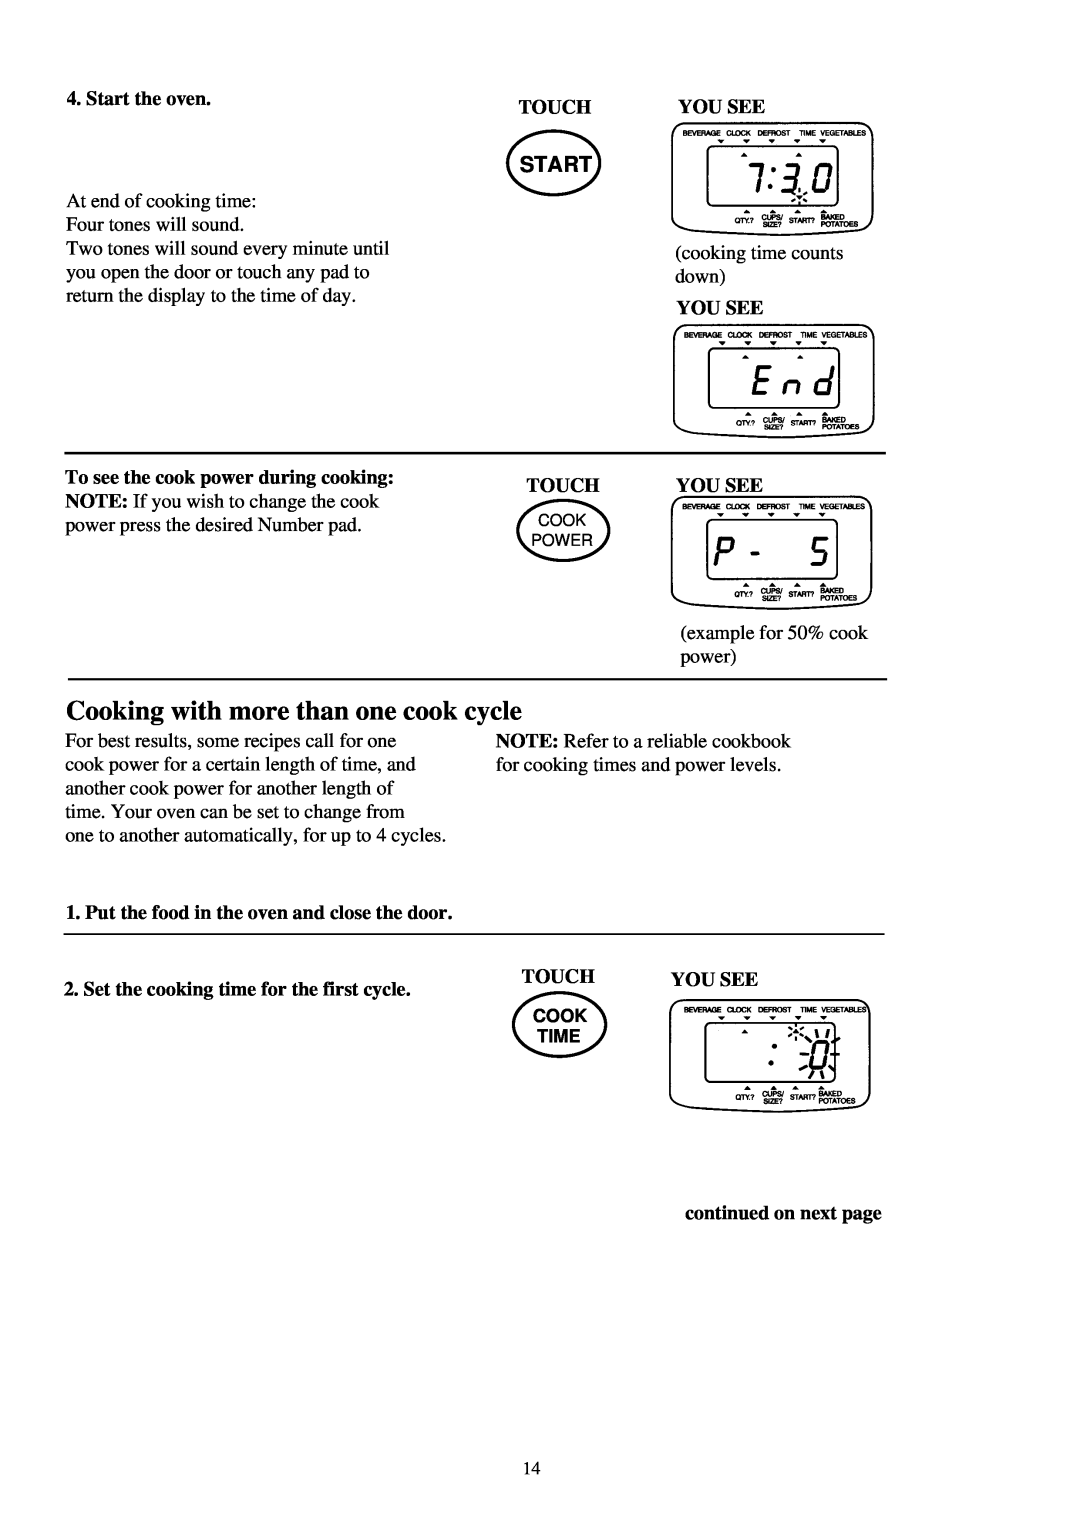 Palsonic PMO-585 manual Cooking with more than one cook cycle, Start the oven, Touch, You See, continued on next page 